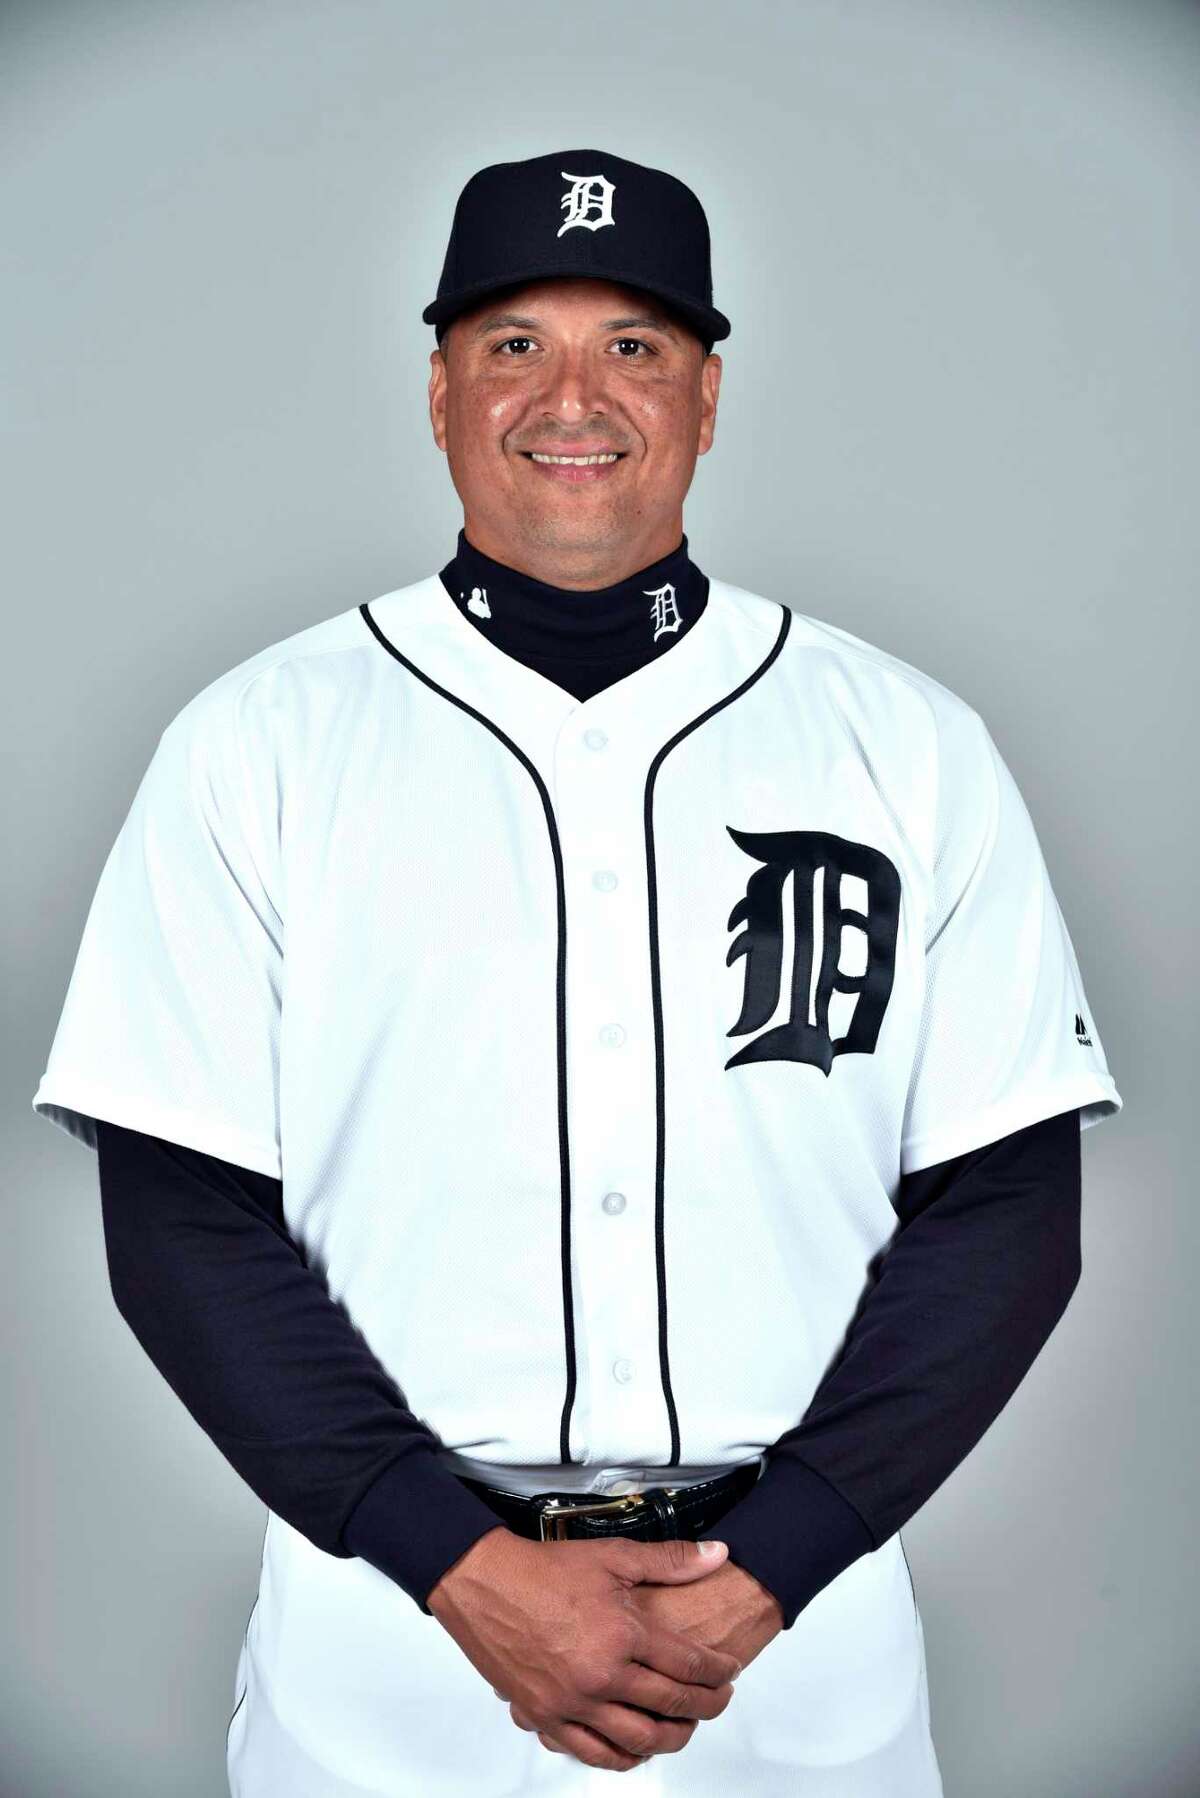 LAKELAND, FL - FEBRUARY 19: Victor Martinez #41 of the Detroit Tigers poses during Photo Day on Sunday, February 19, 2017 at Publix Field at Joker Marchant Stadium in Lakeland, Florida. (Photo by Tony Firriolo/MLB Photos via Getty Images) *** Local Caption *** Victor Martinez